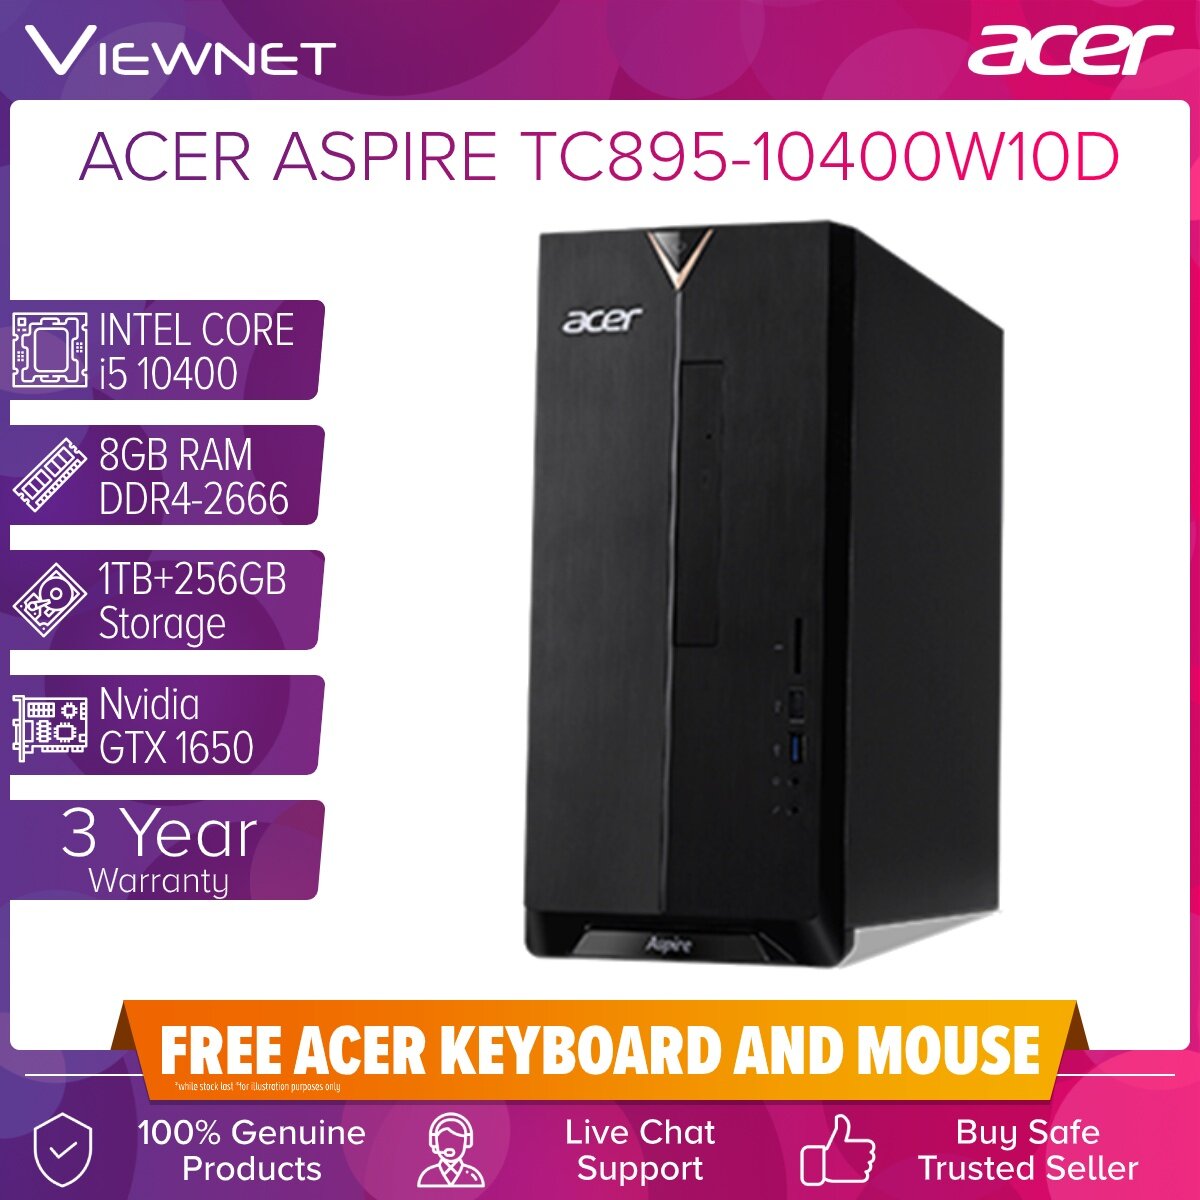 Support acer chat online Live chat